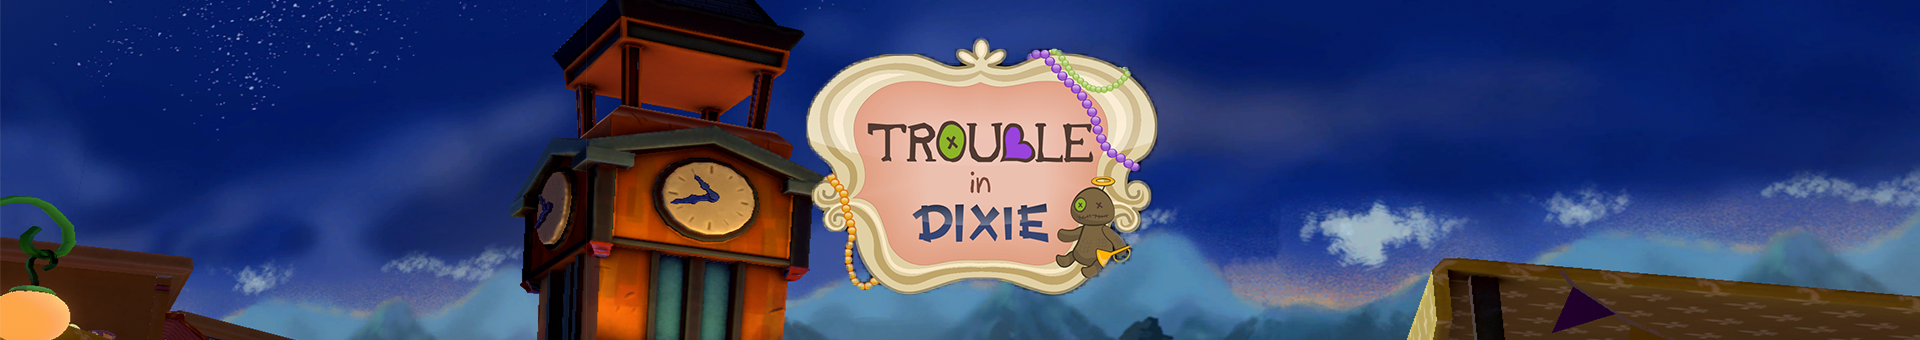 Trouble in Dixie